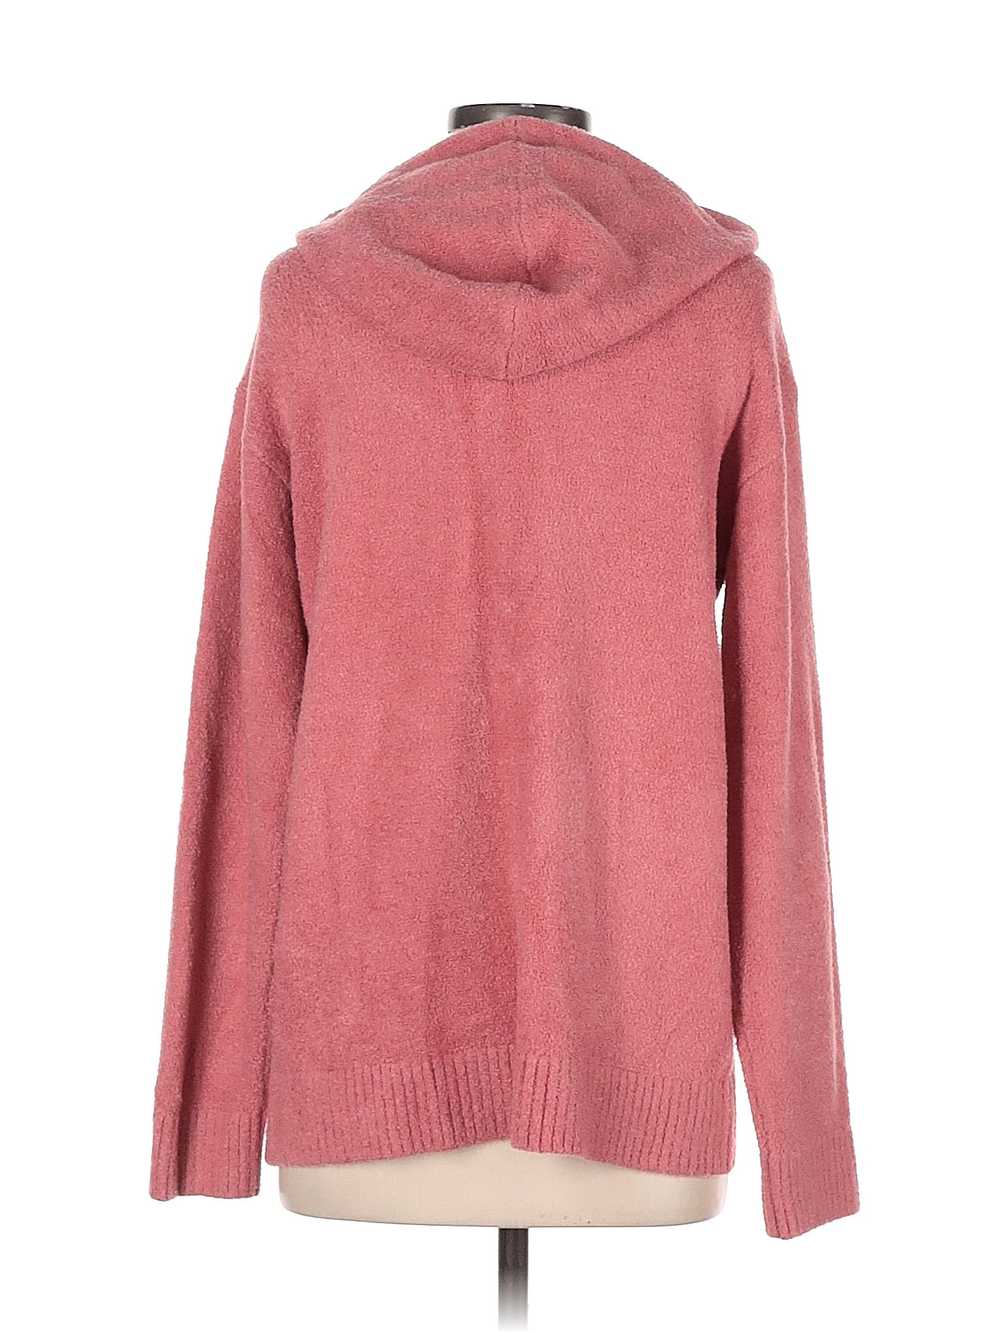 Lands' End Women Pink Pullover Hoodie S - image 2